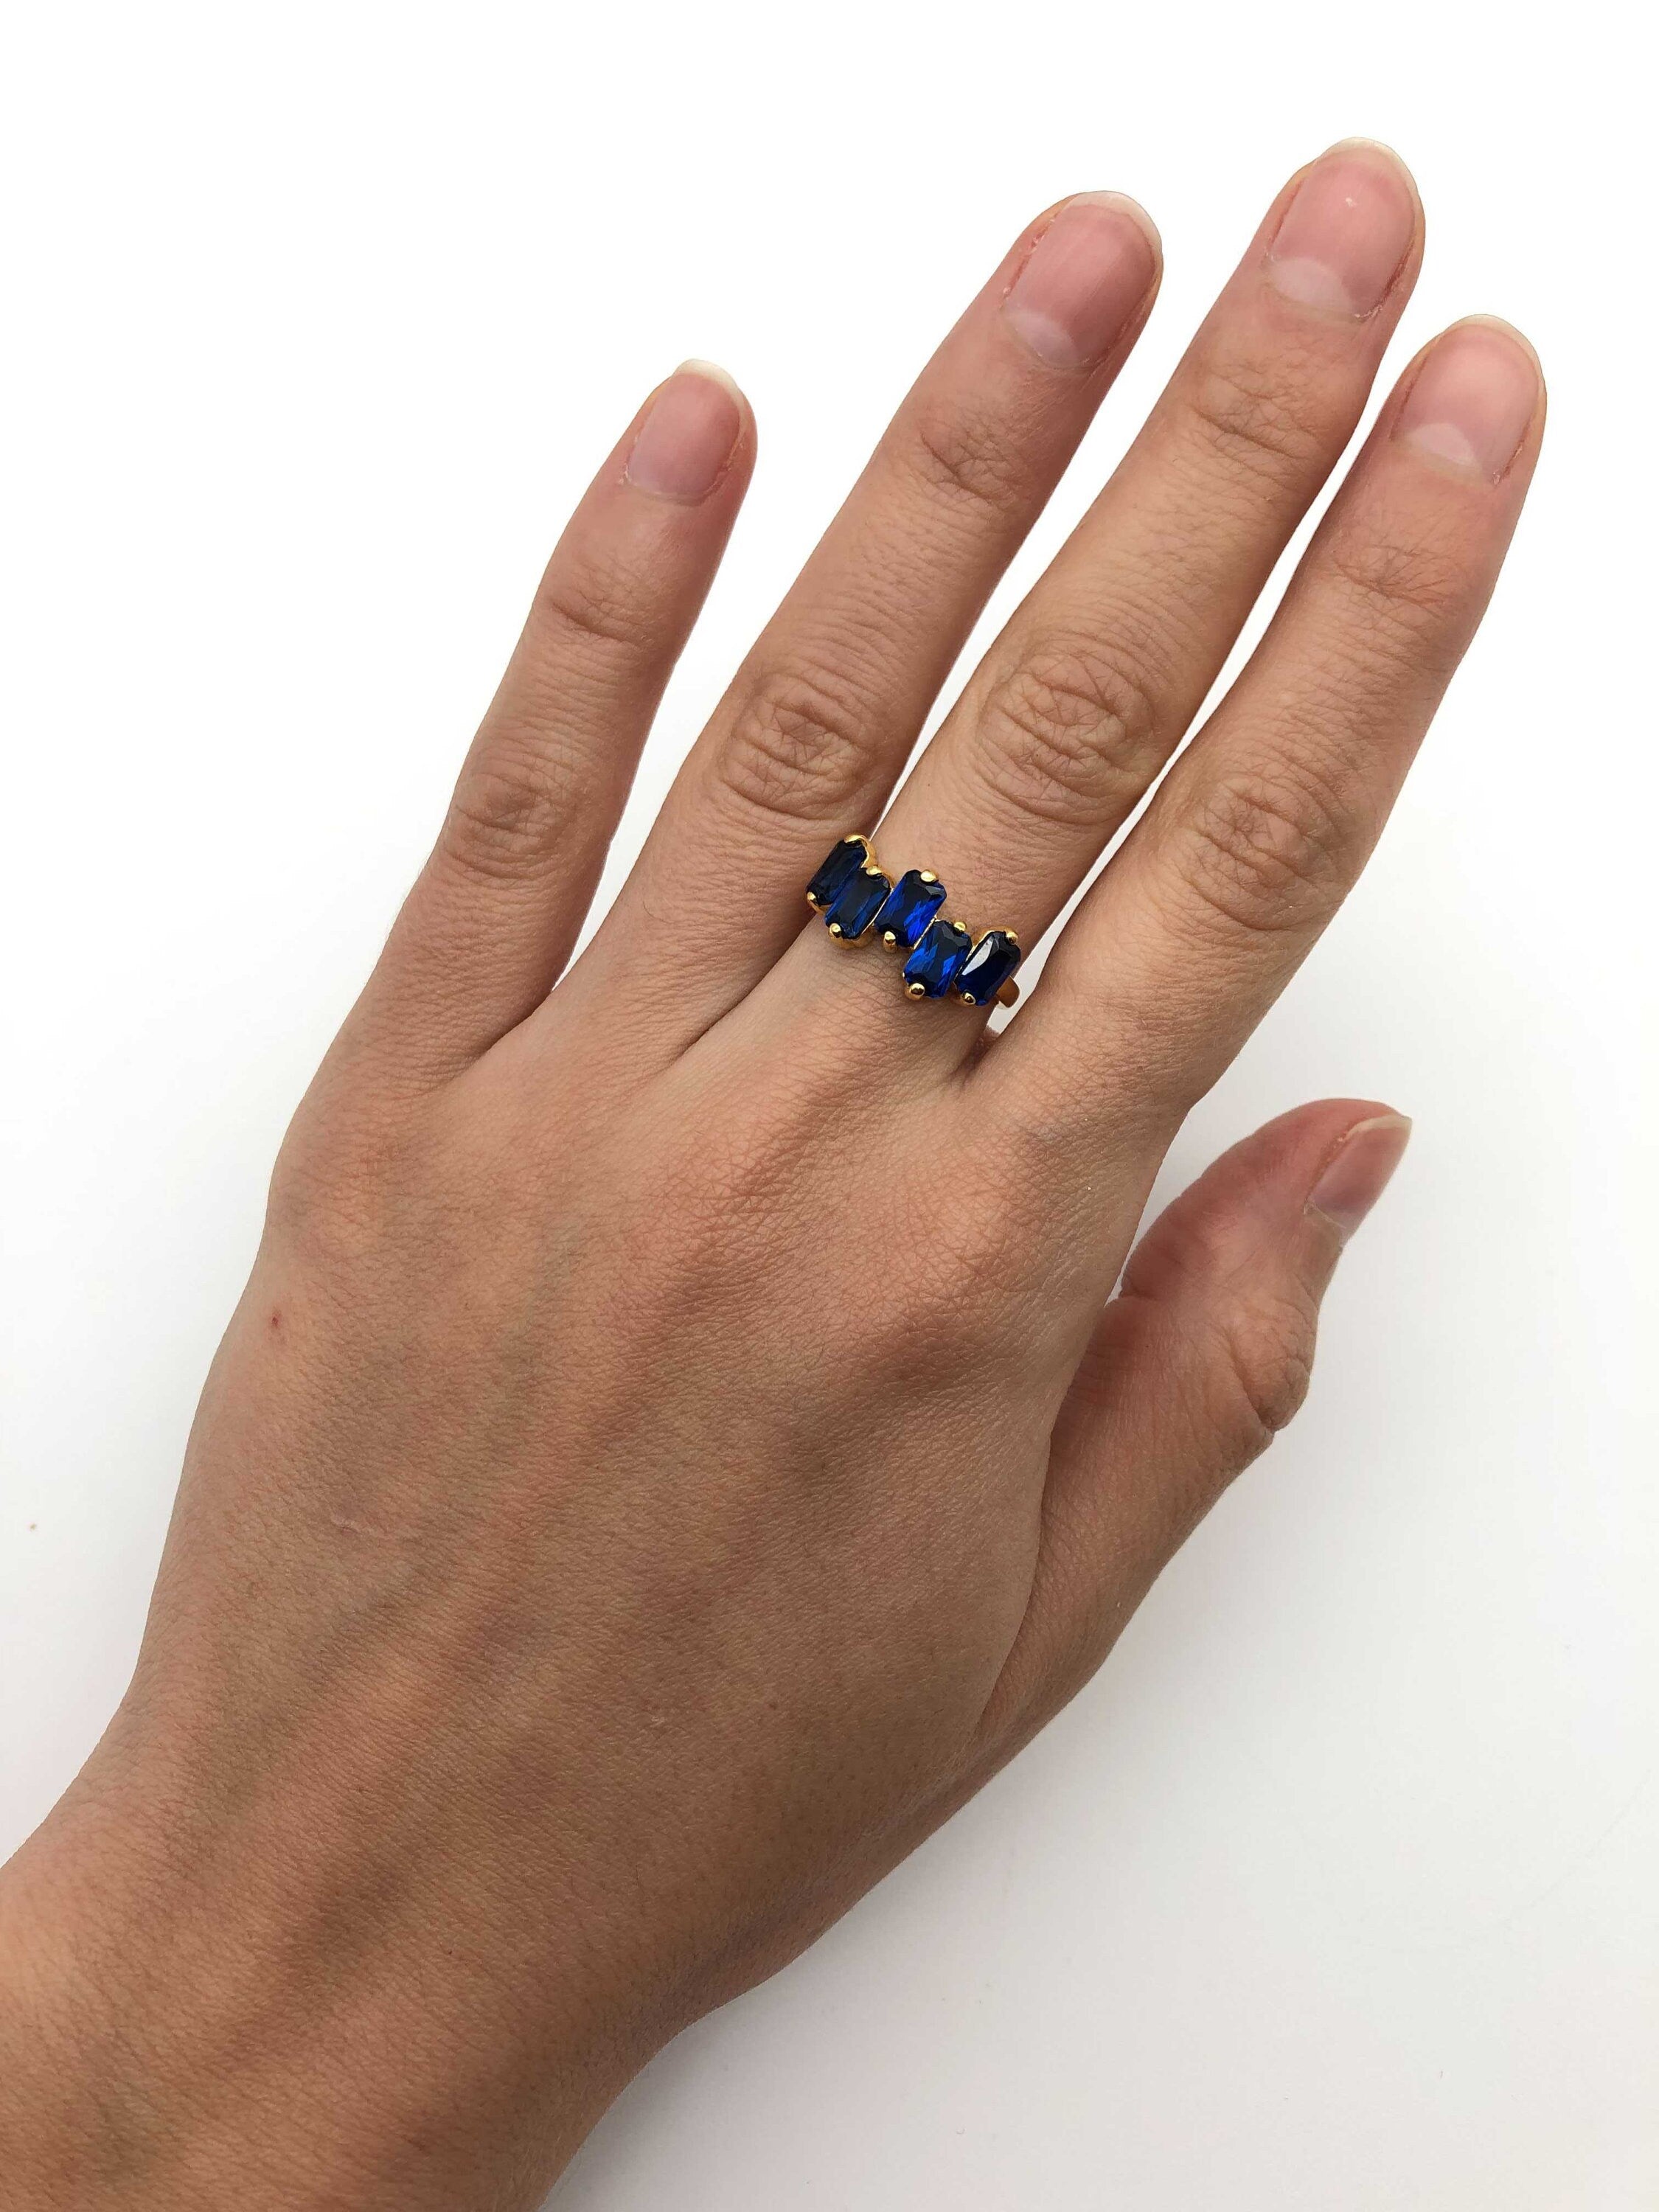 Gold Sapphire Ring, Baguette Ring, Created Sapphire, Gold Sapphire Band, Emerald Cut Ring, Gold Vermeil Ring, Blue Sapphire Ring, Blue Ring